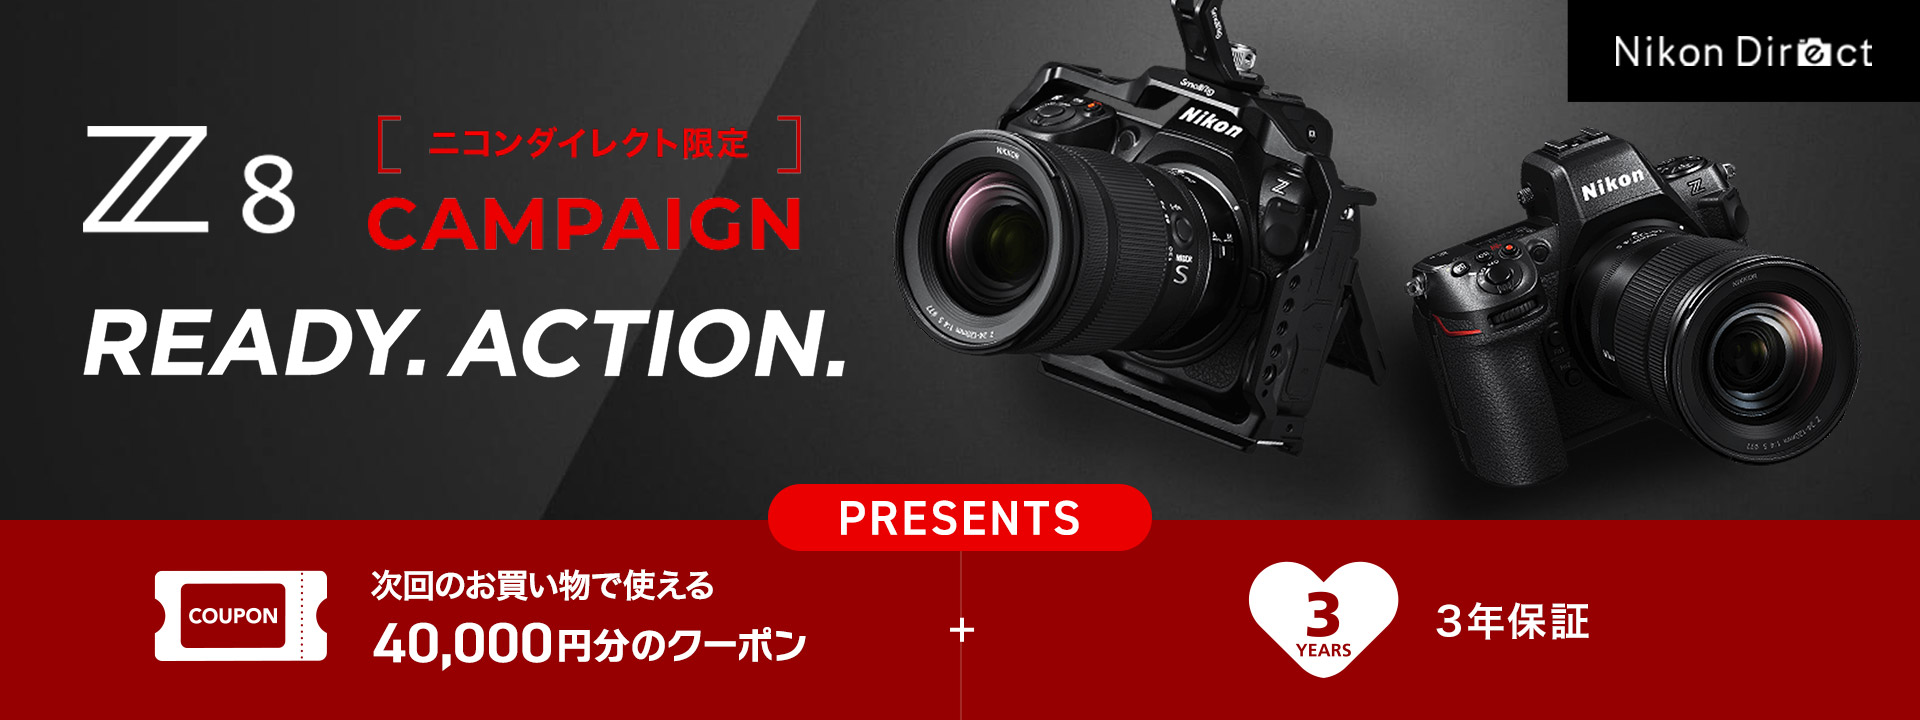 Z 8 CAMPAIGN [ニコンダイレクト限定]